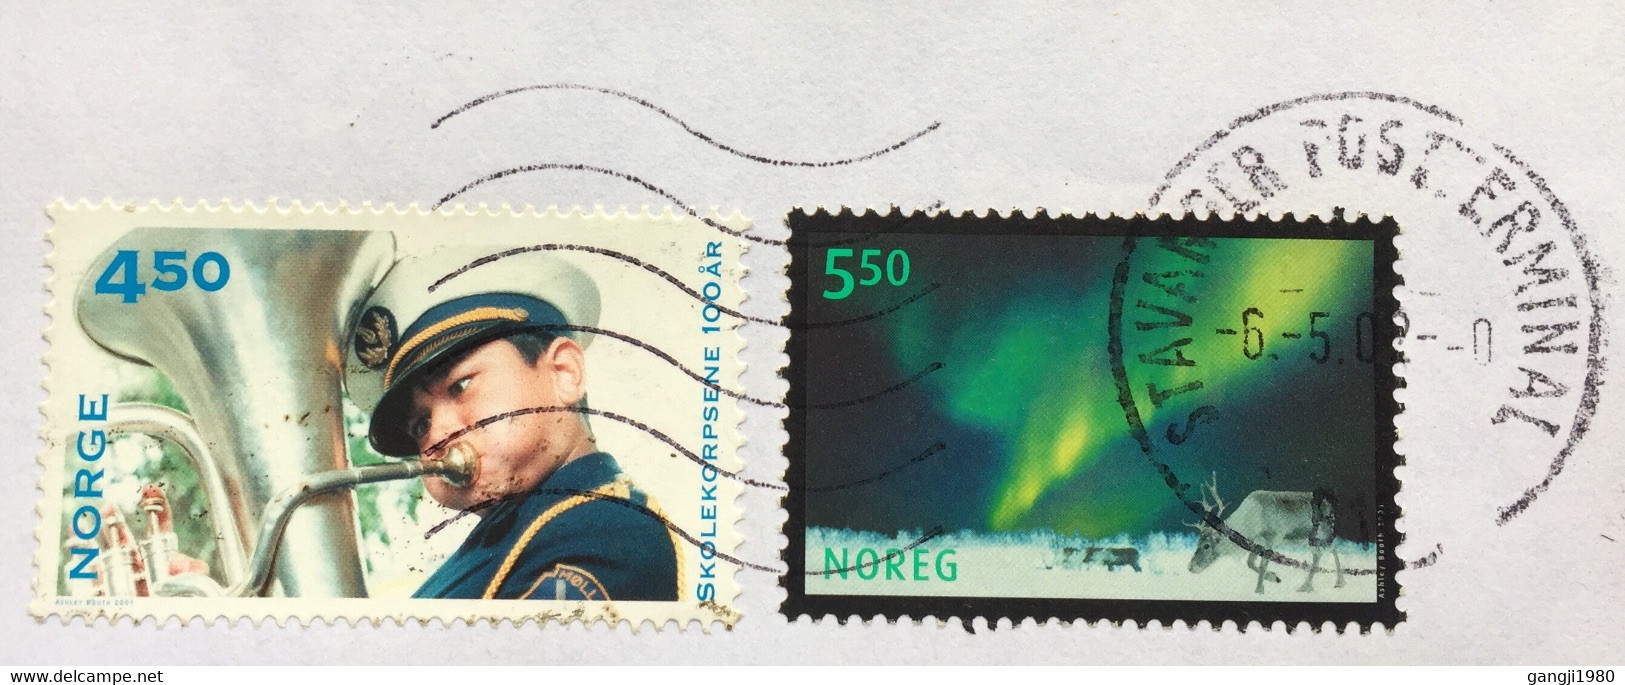 NORWAY 2002, USED AIRMAIL COVER TO INDIA,2 STAMPS ,MUSIC,ANIMAL,NATURE STAVANGER CANCELLATION - Covers & Documents